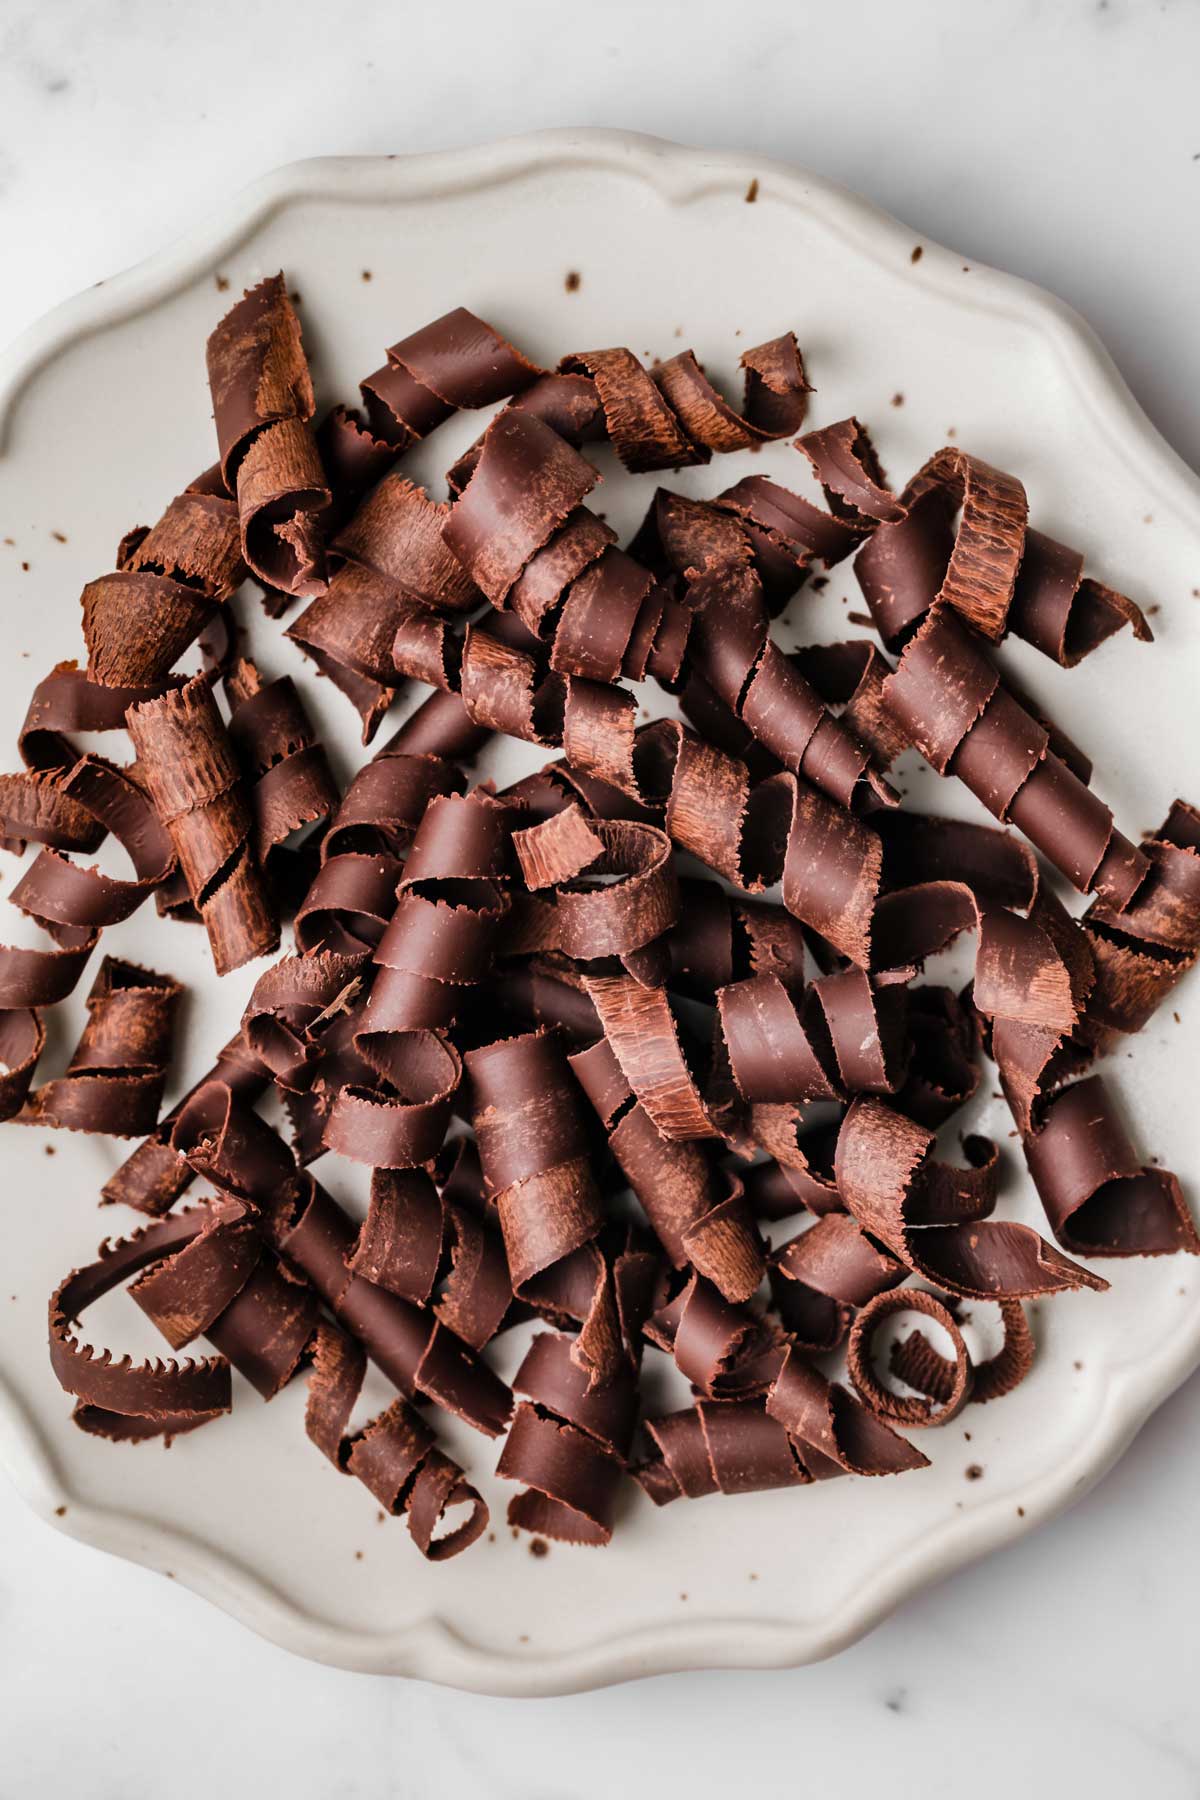 How to Grate Chocolate For Garnishing Your Desserts